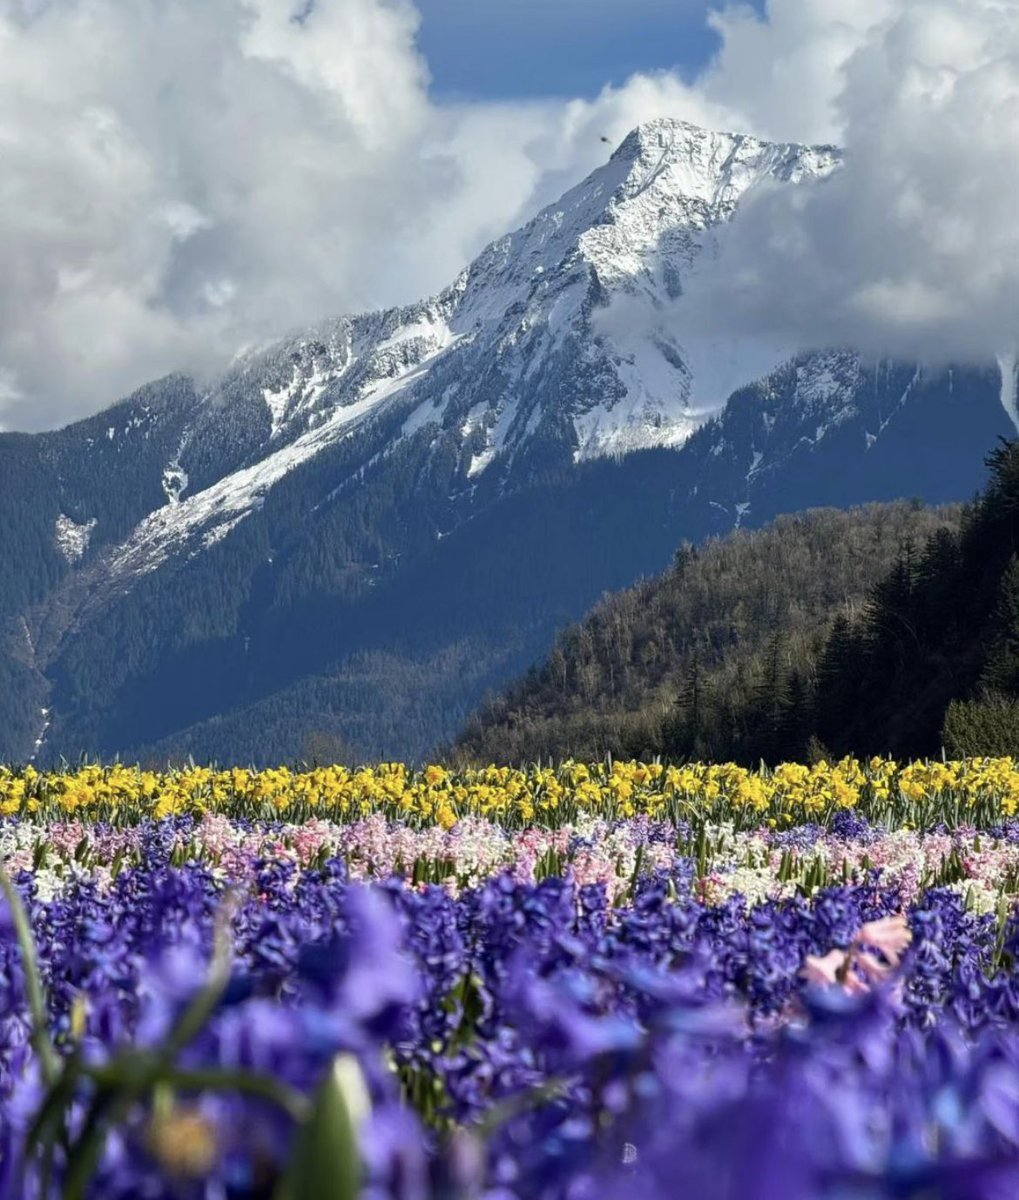 Opening day of the 2024 Harrison Tulip Festival has been announced! The flower fields will be ready for visitors on April 8th 🌷

Click here for tickets:  harrisontulipfest.com

#harrisontulipfest #Agassiz #Harrisonrivervalley #theFraservalley #ExploreBC #GardensBC